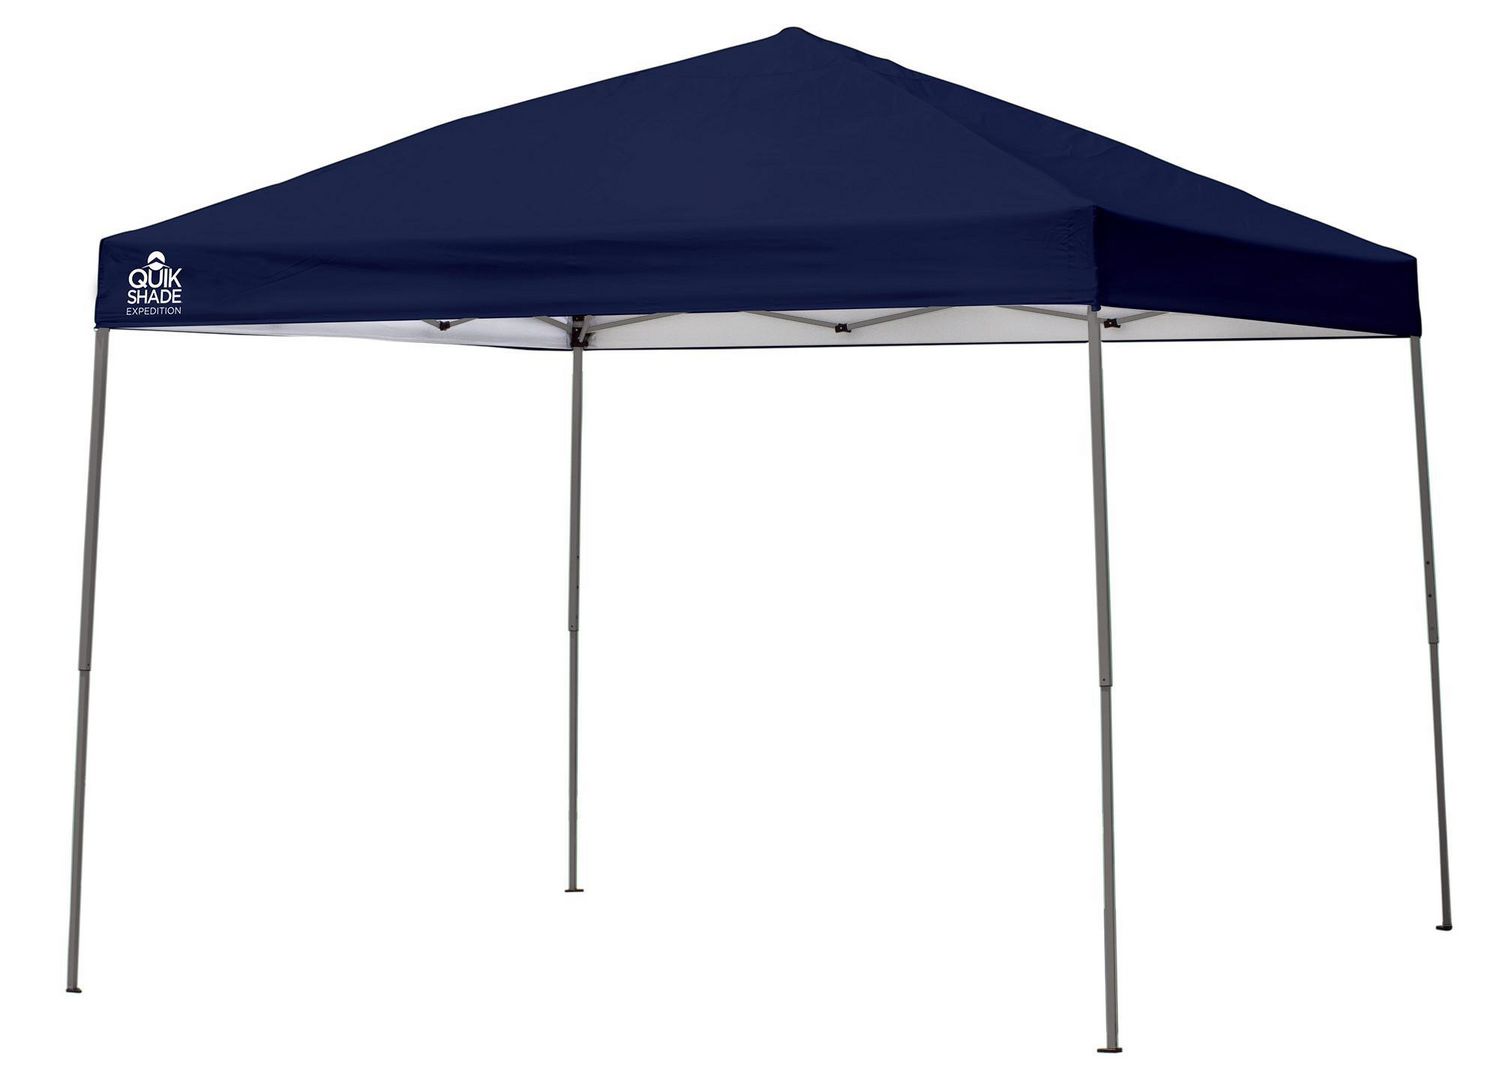 Expedition EX100 10 x 10 ft. Straight Leg Canopy - Midnight Blue ...